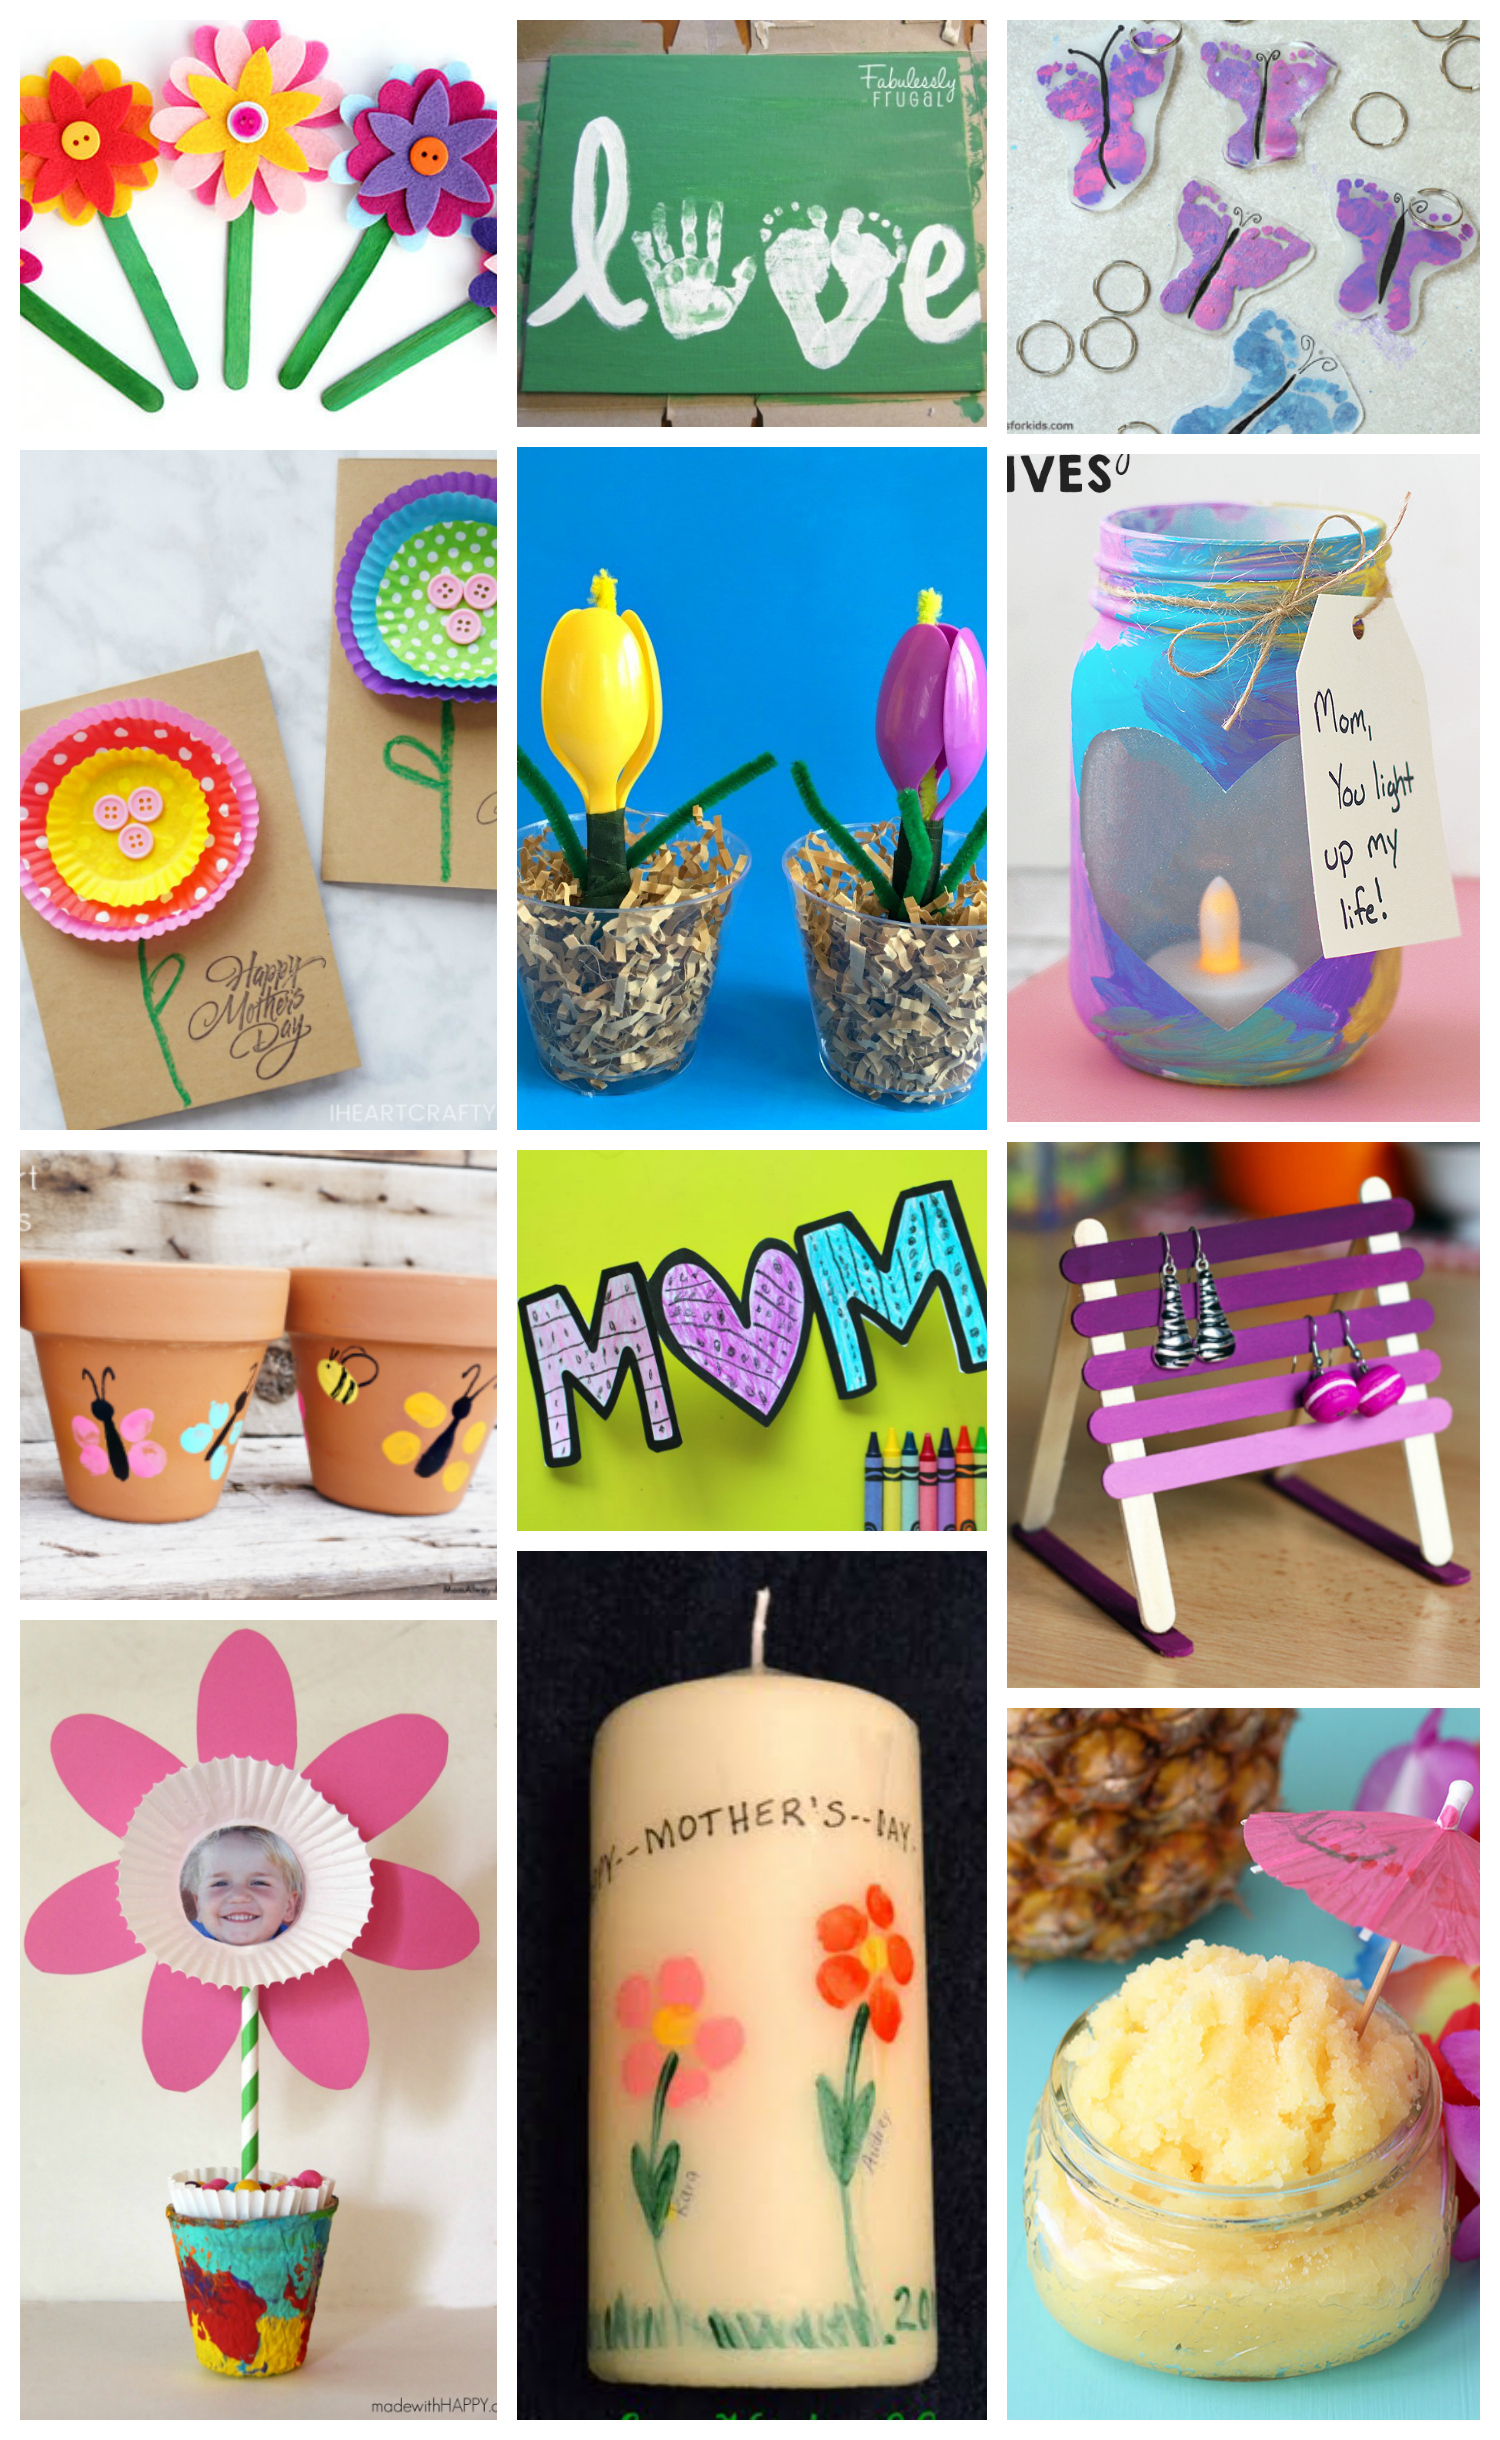 https://www.happinessishomemade.net/wp-content/uploads/2018/04/Mothers-Day-Crafts-for-Kids-Gift-Ideas-for-Moms.jpg